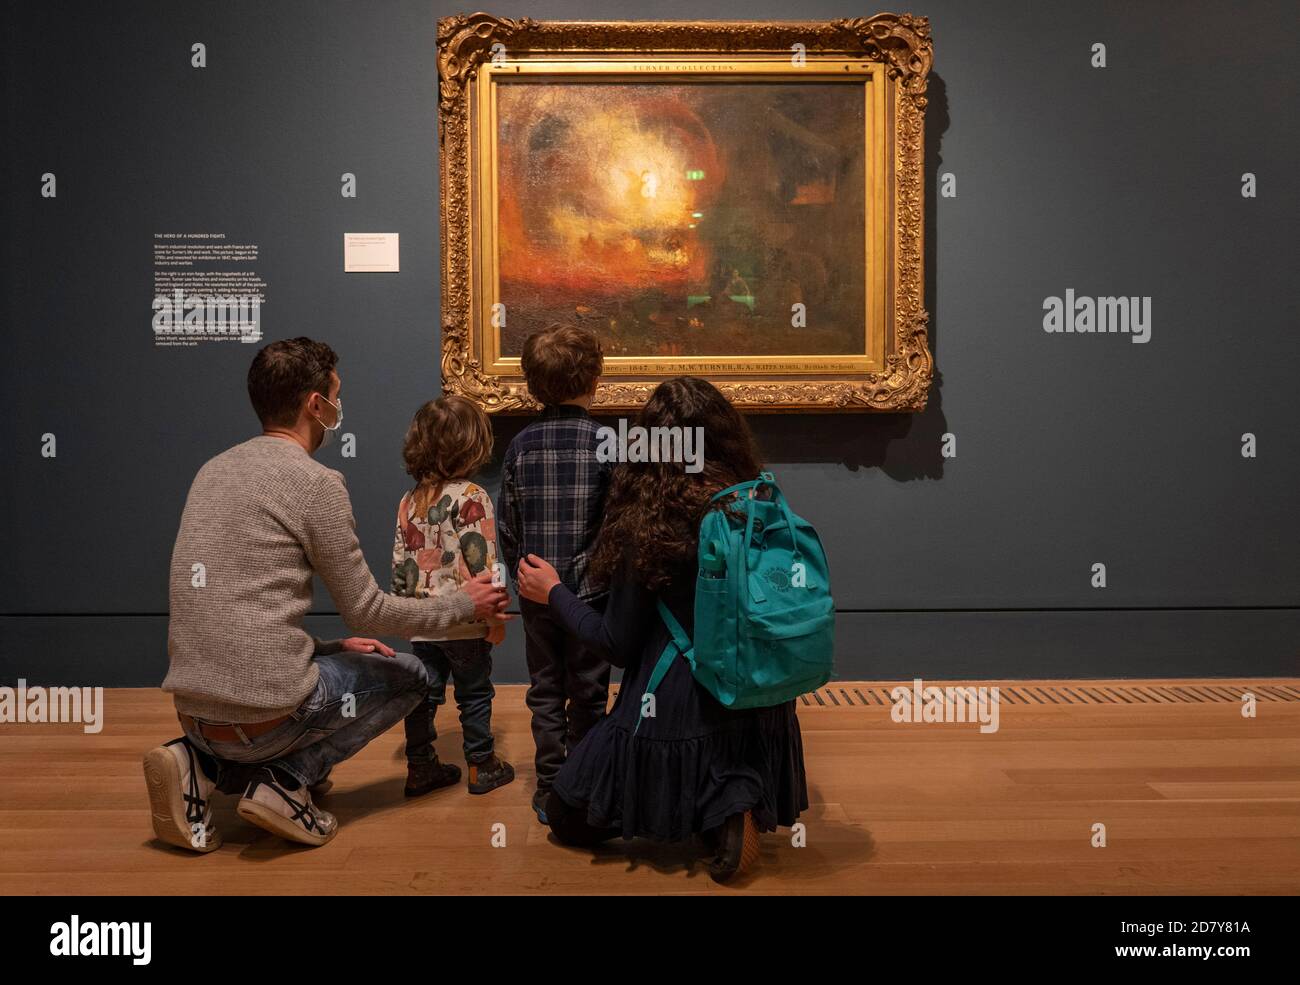 London, England. 26th October 2020. A family looking at Turner’s The Hero of a Hundred Fights oil on canvas painting during the press viewing of Turner’s Modern World at the Tate Britain. Opening on the 28th October 2020, its a major exhibition is dedicated to JMW Turner (1775-1851). Turner’s Modern World reveals how the British landscape painter found new ways to capture daily events, from technology’s impact on the natural world to the effects of modernisation on society. (photo by Sam Mellish / Alamy Live News) Stock Photo